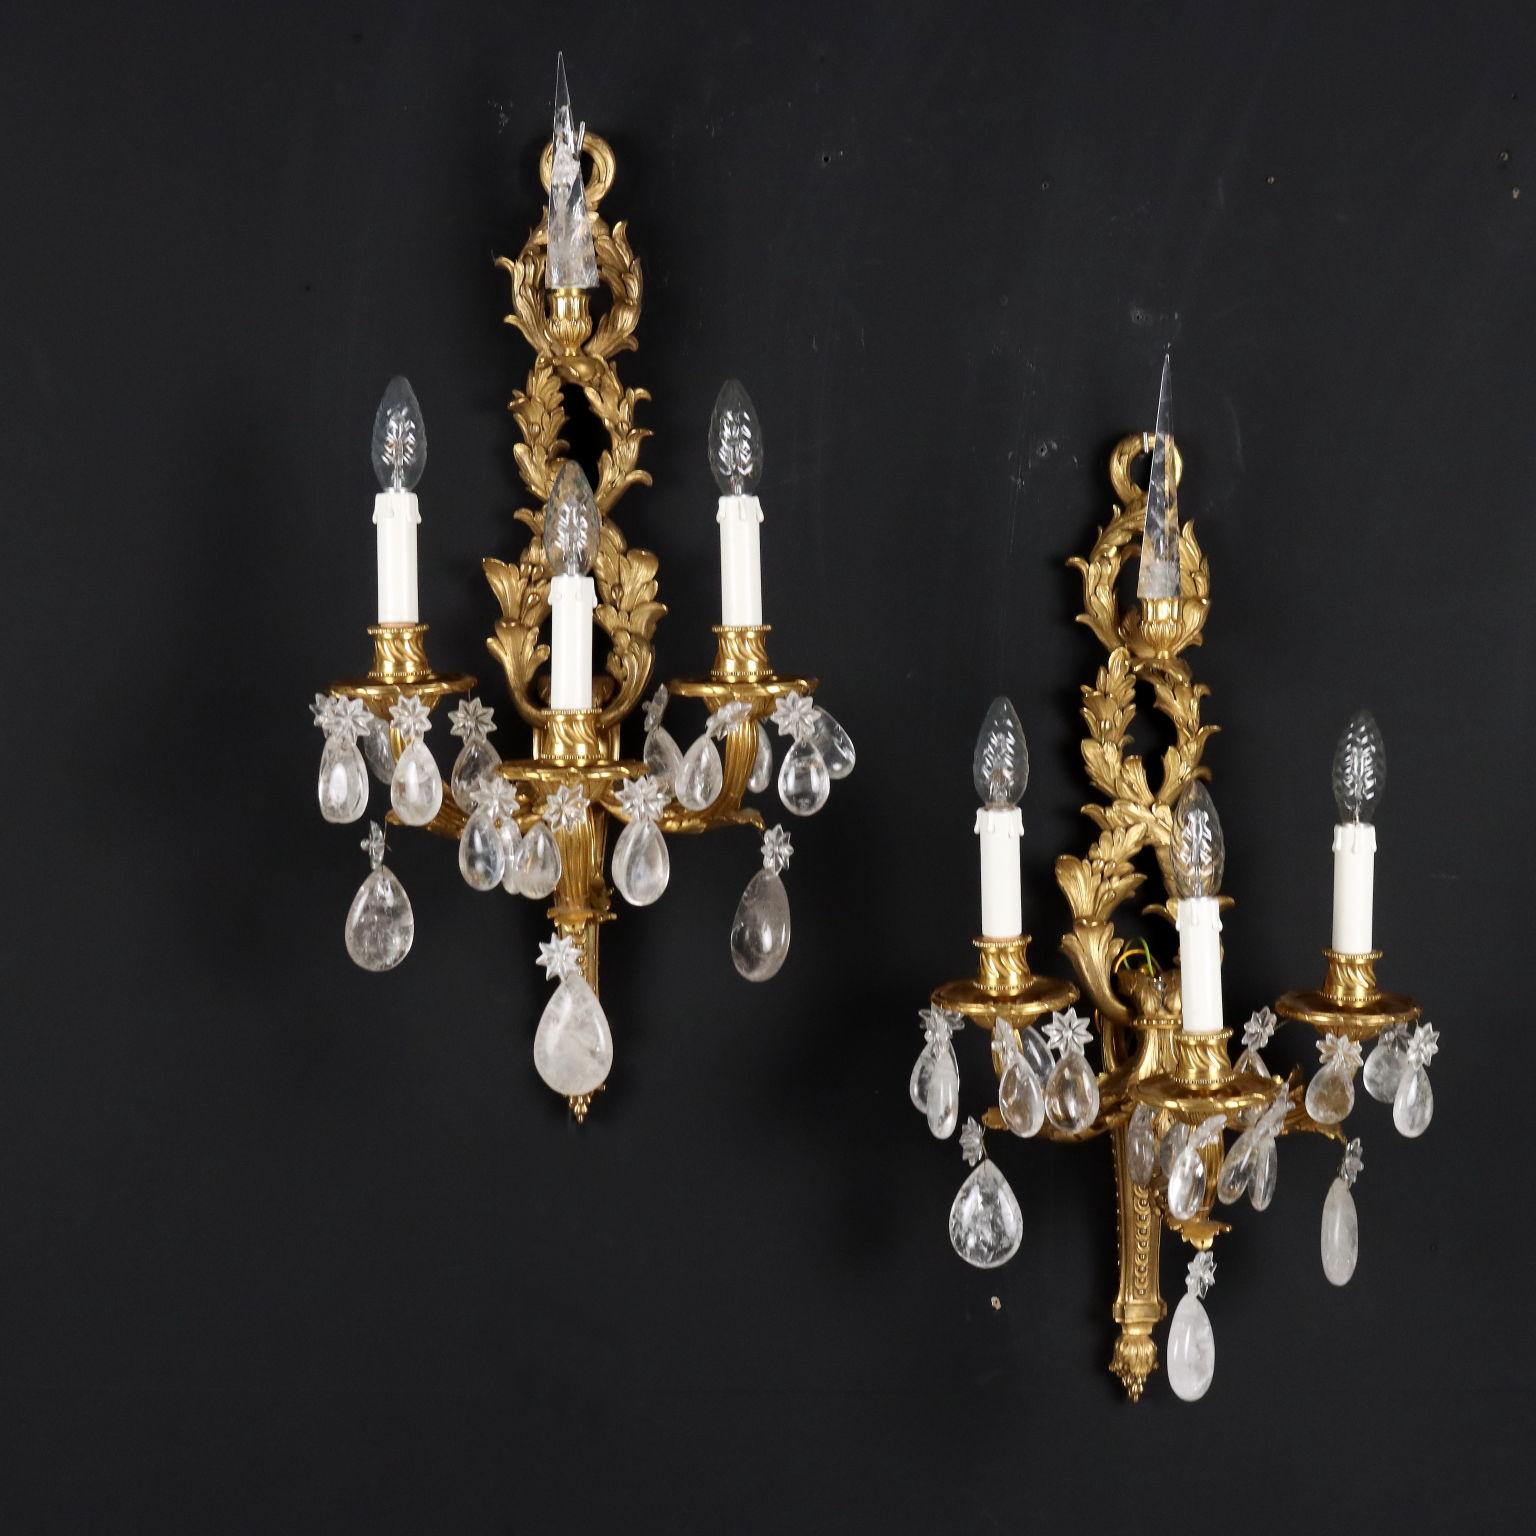 Pair of three-light wall sconces with gilded bronze frame, obelisk on top and rock crystal pendants. Italy 20th century.